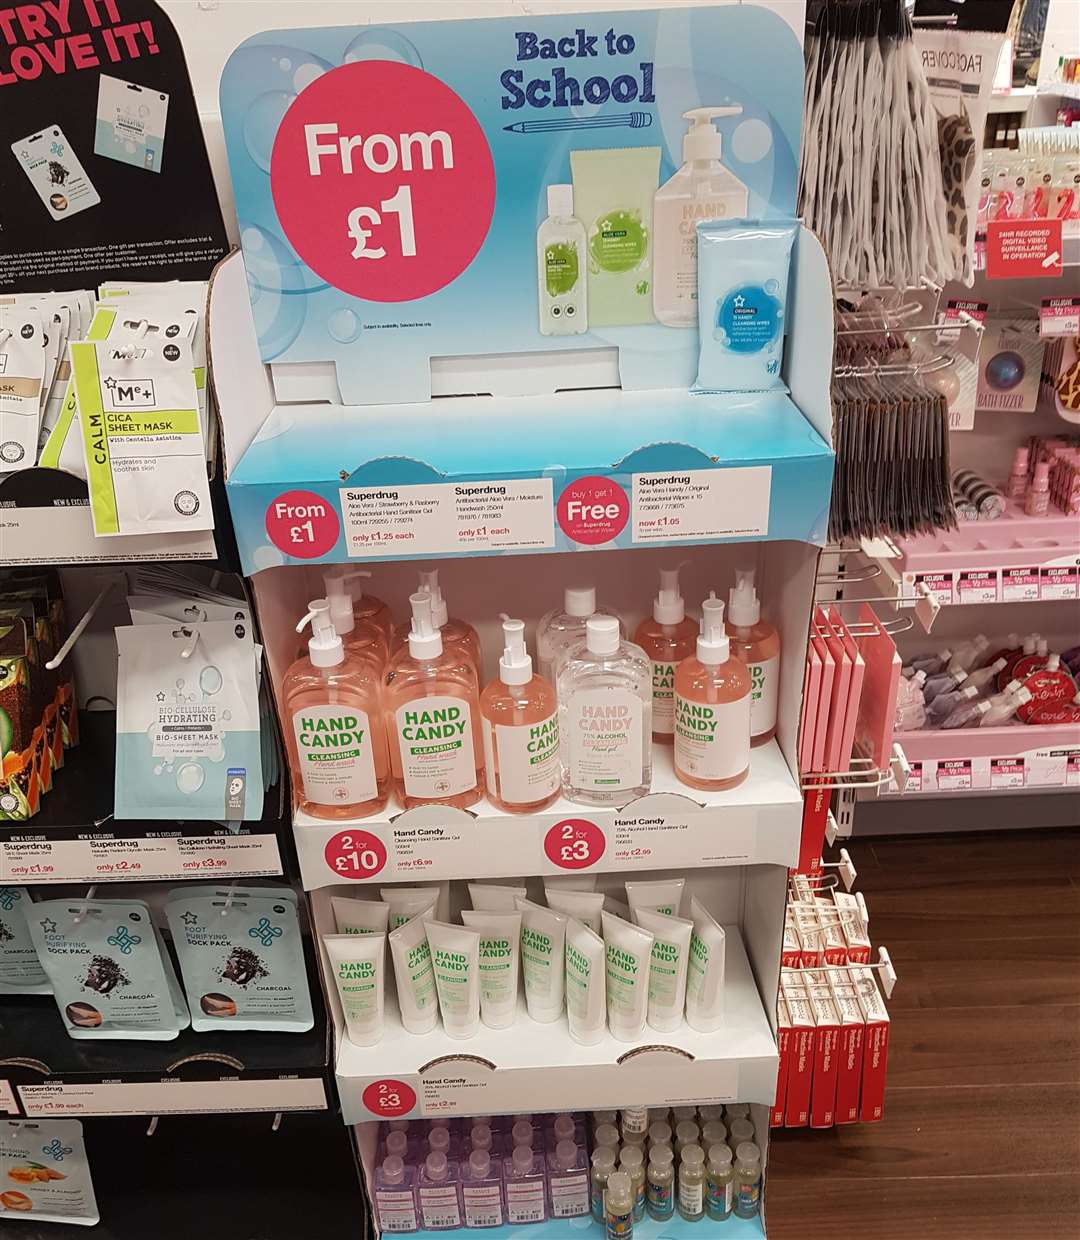 Hand gel was fully stocked in Superdrug in The Mall